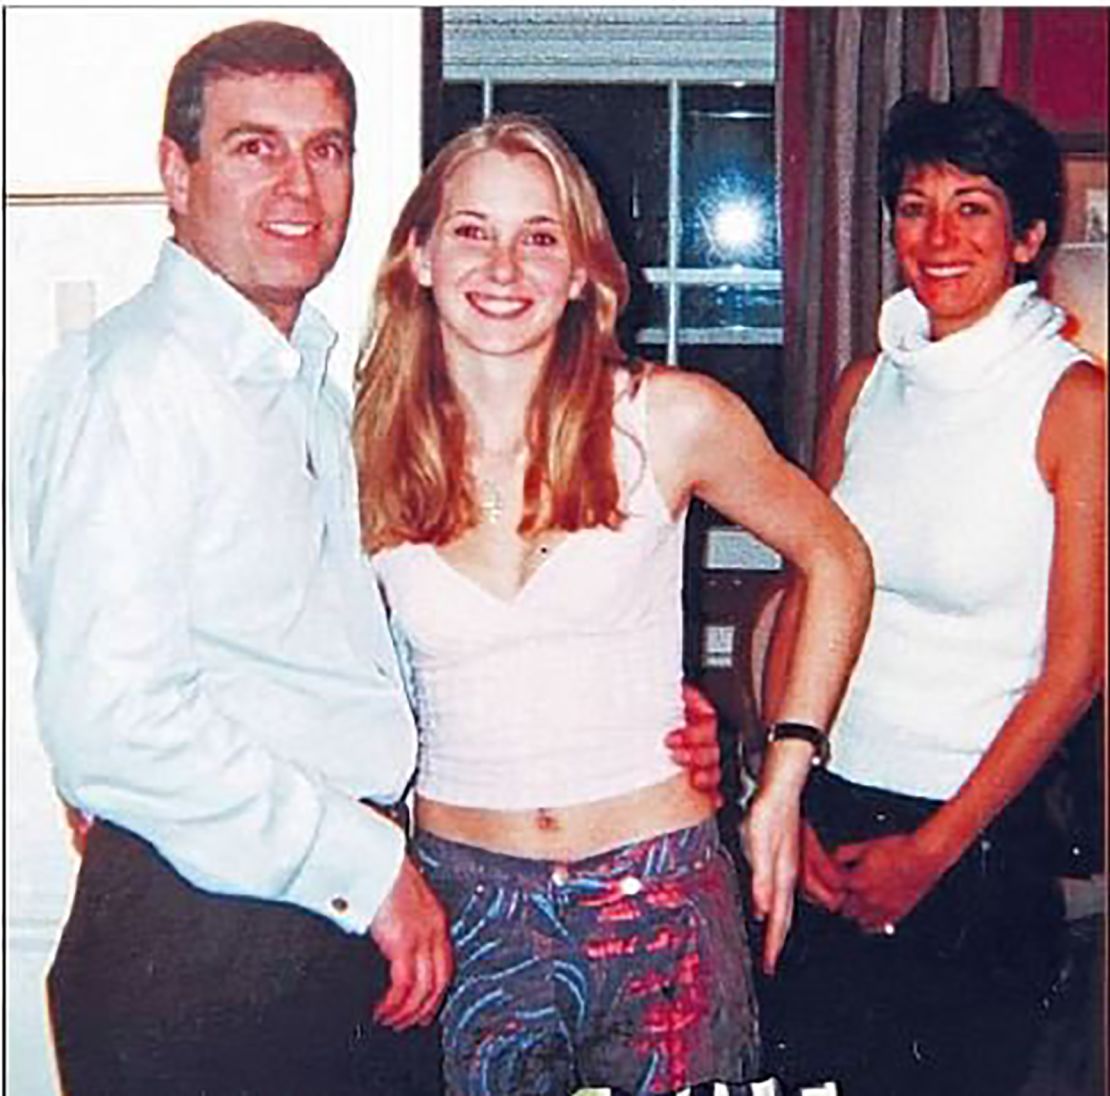 A photograph appearing to show Prince Andrew with Virginia Roberts Giuffre and, in the background, Ghislaine Maxwell.